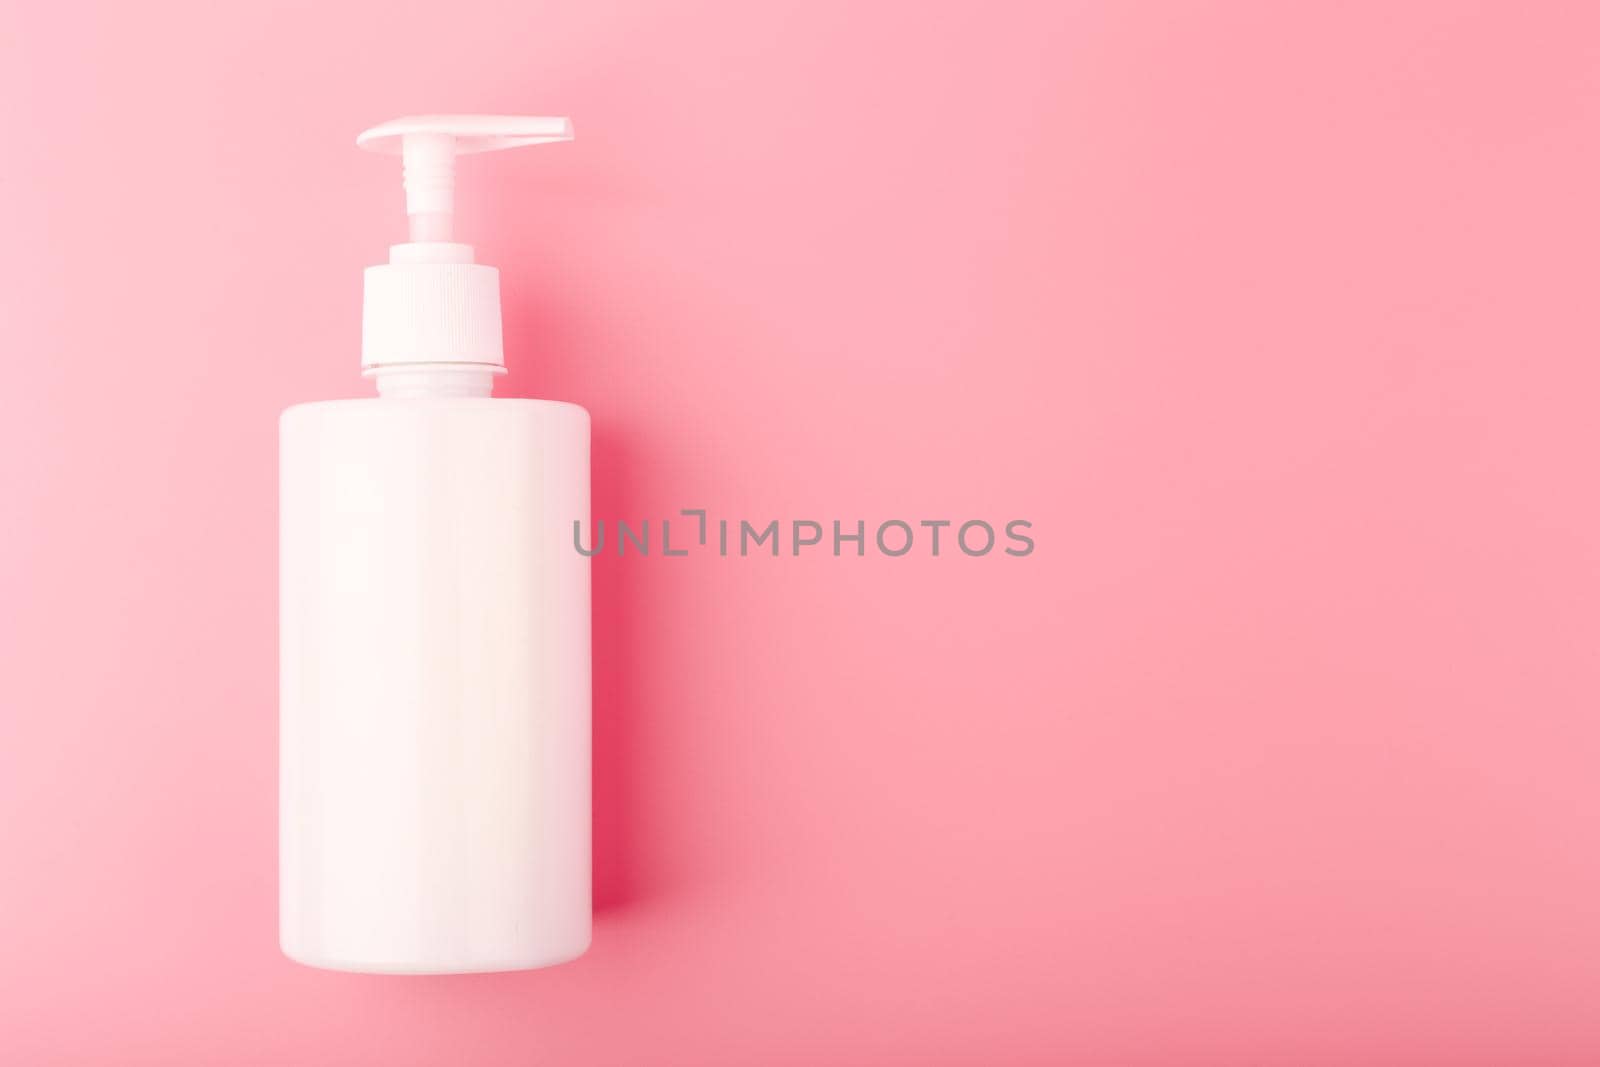 Top view of shower or intimate gel in white unbranded tube on pink background with copy space. Concept of hygiene, beauty products and pampering